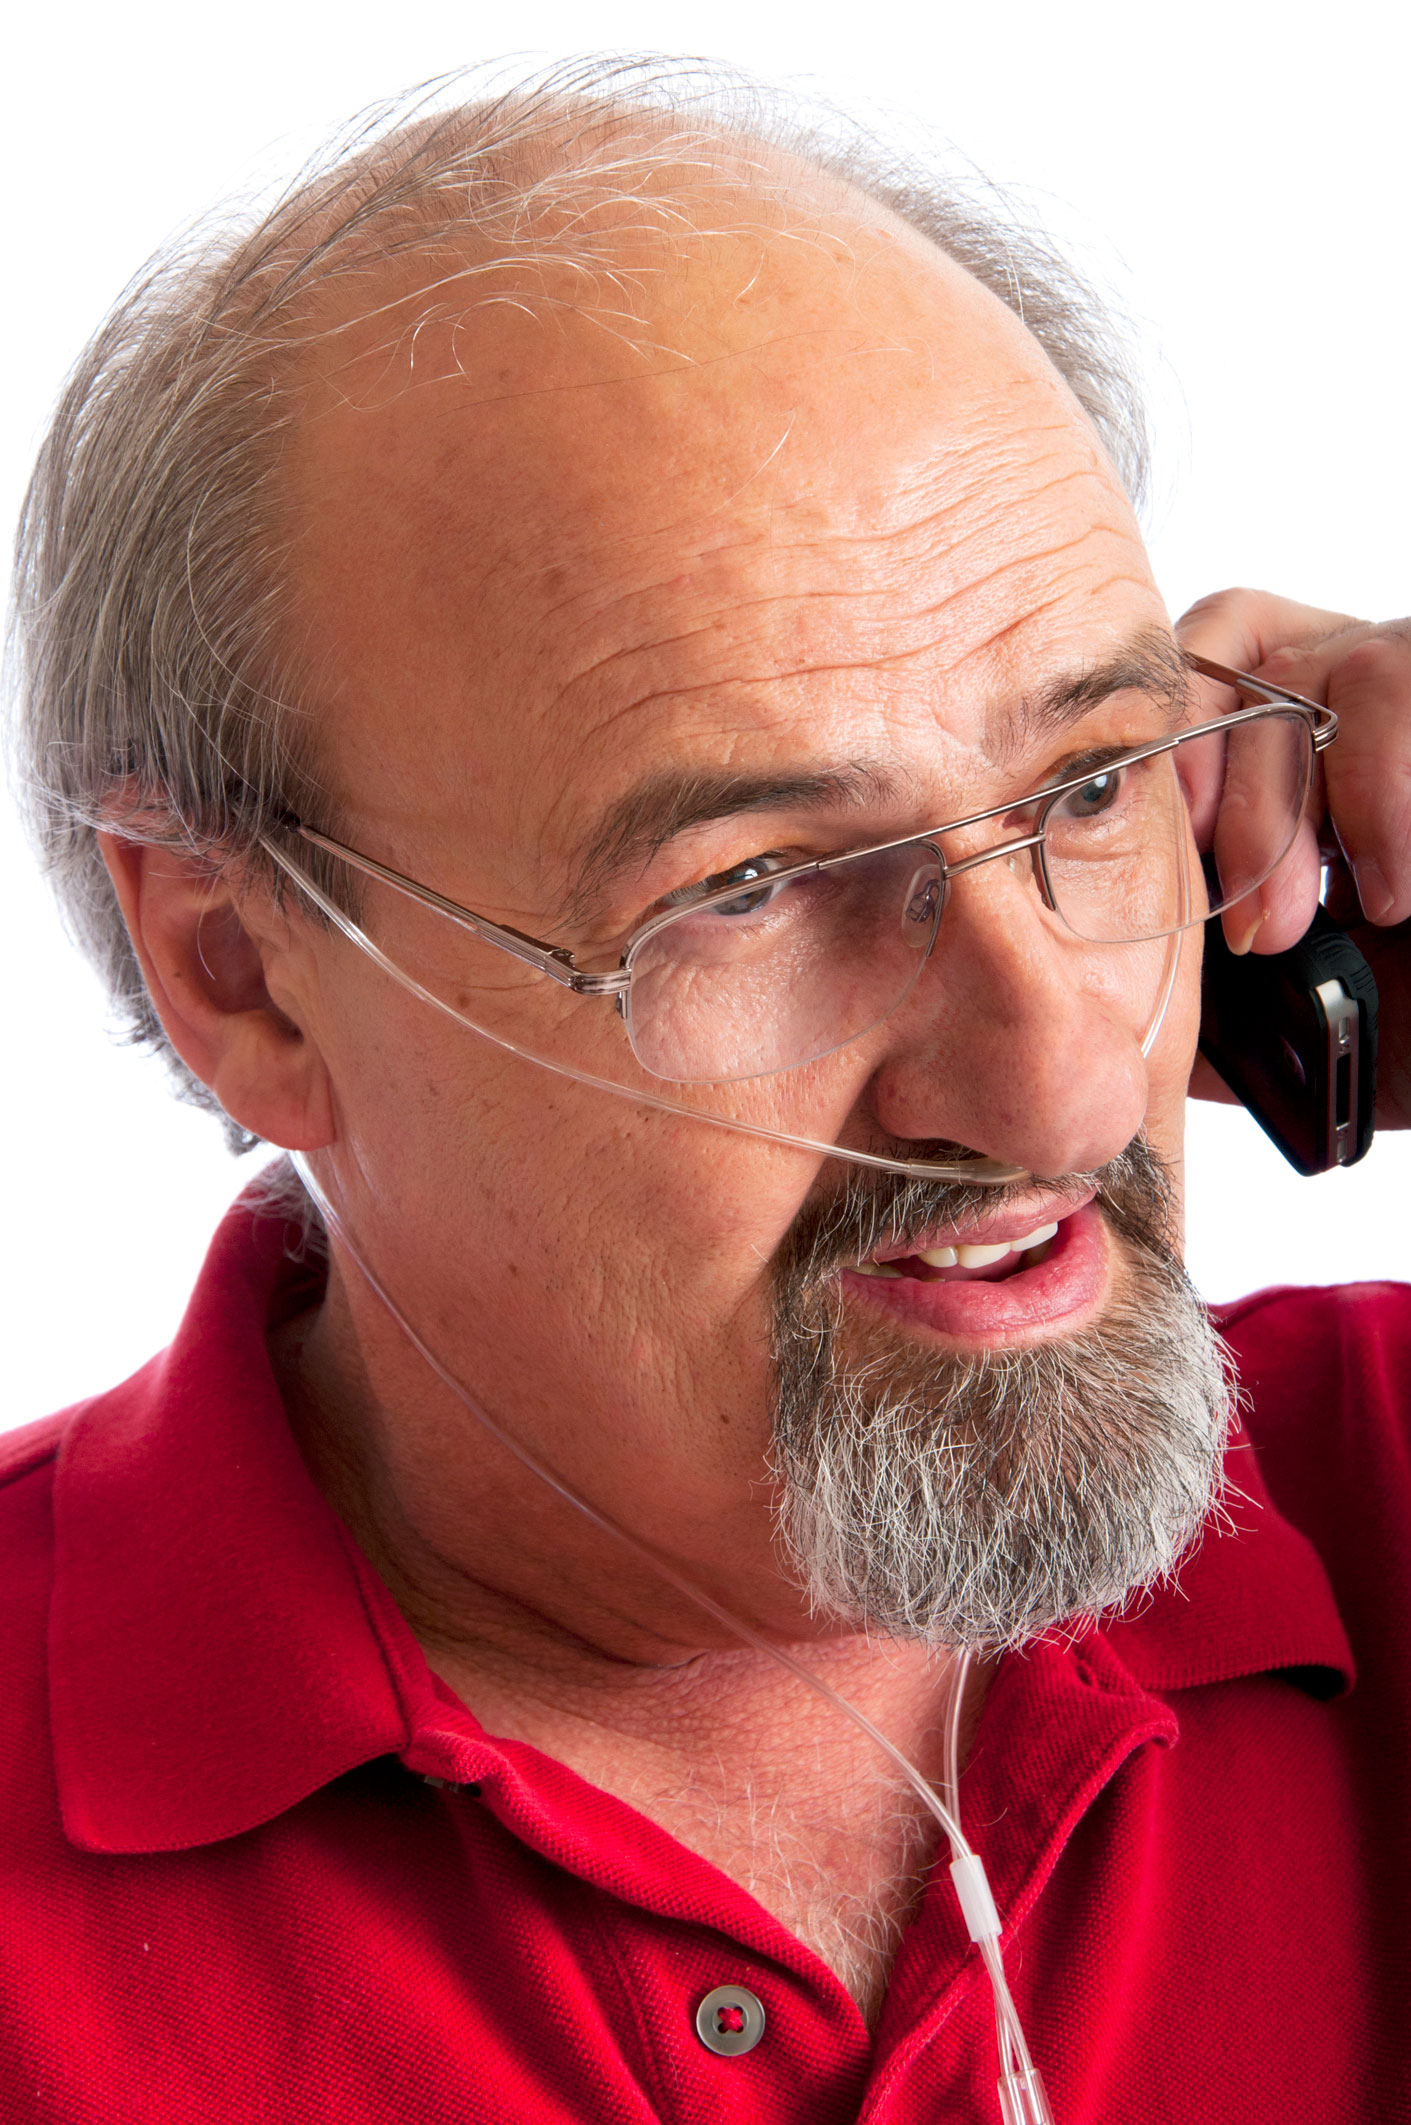 Man talking on the phone while receiving oxygen through a thin nasal tube.